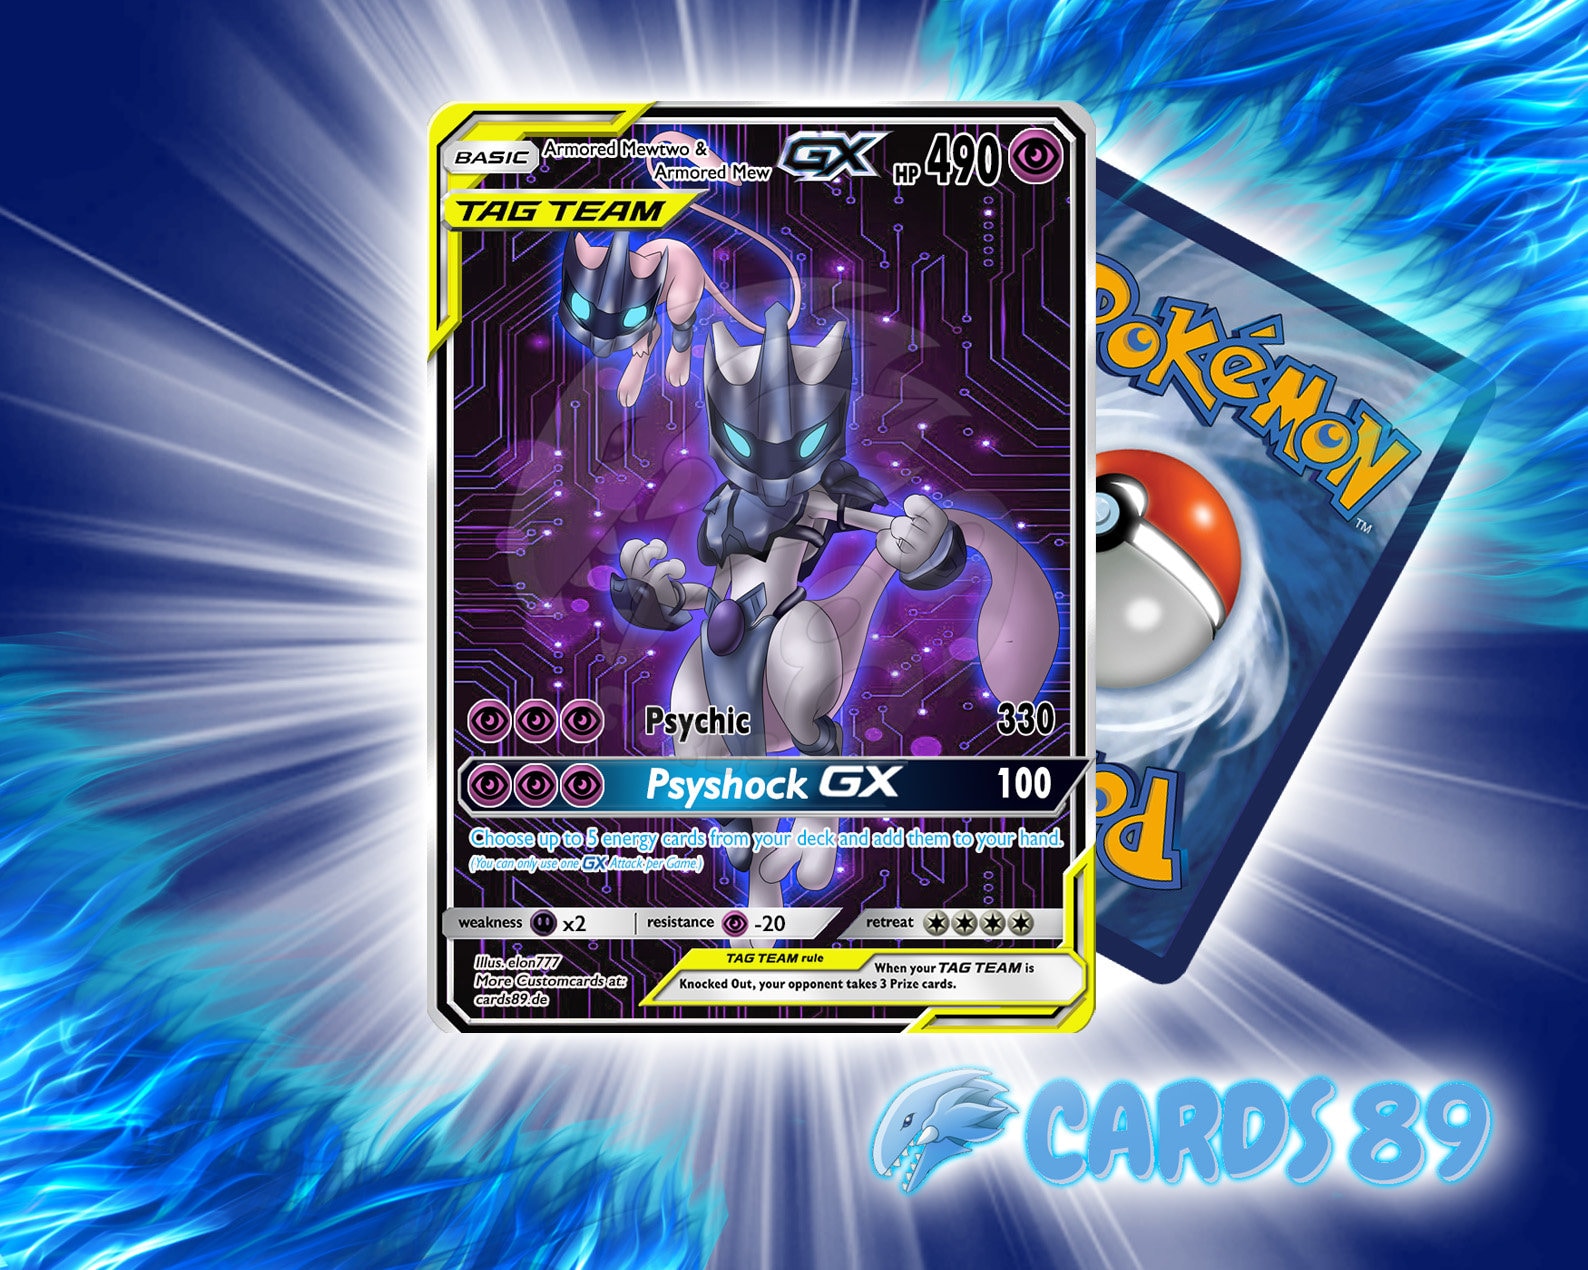 Giovanni's Mewtwo armored Mewtwo Team Rocket Edition 